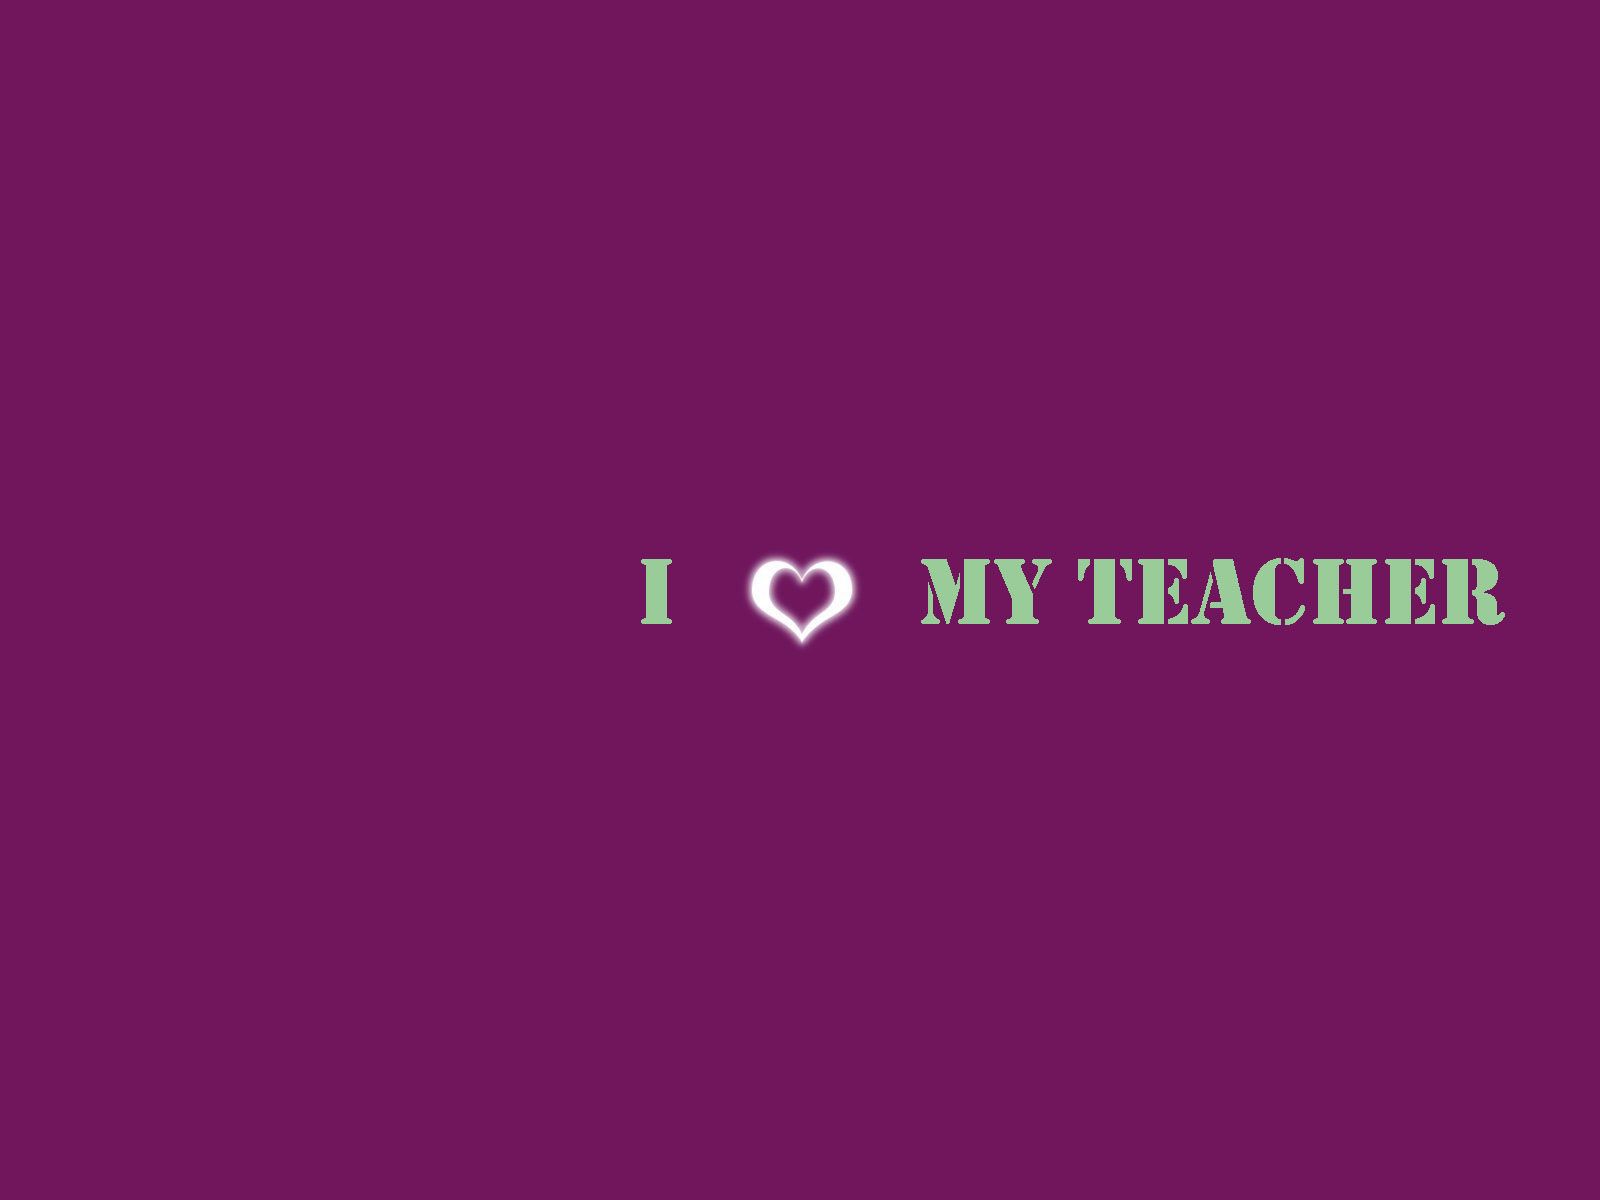 Wallpaper Teaching. Teaching Wallpaper, Teaching Apple Background and Teaching Feeling Wallpaper